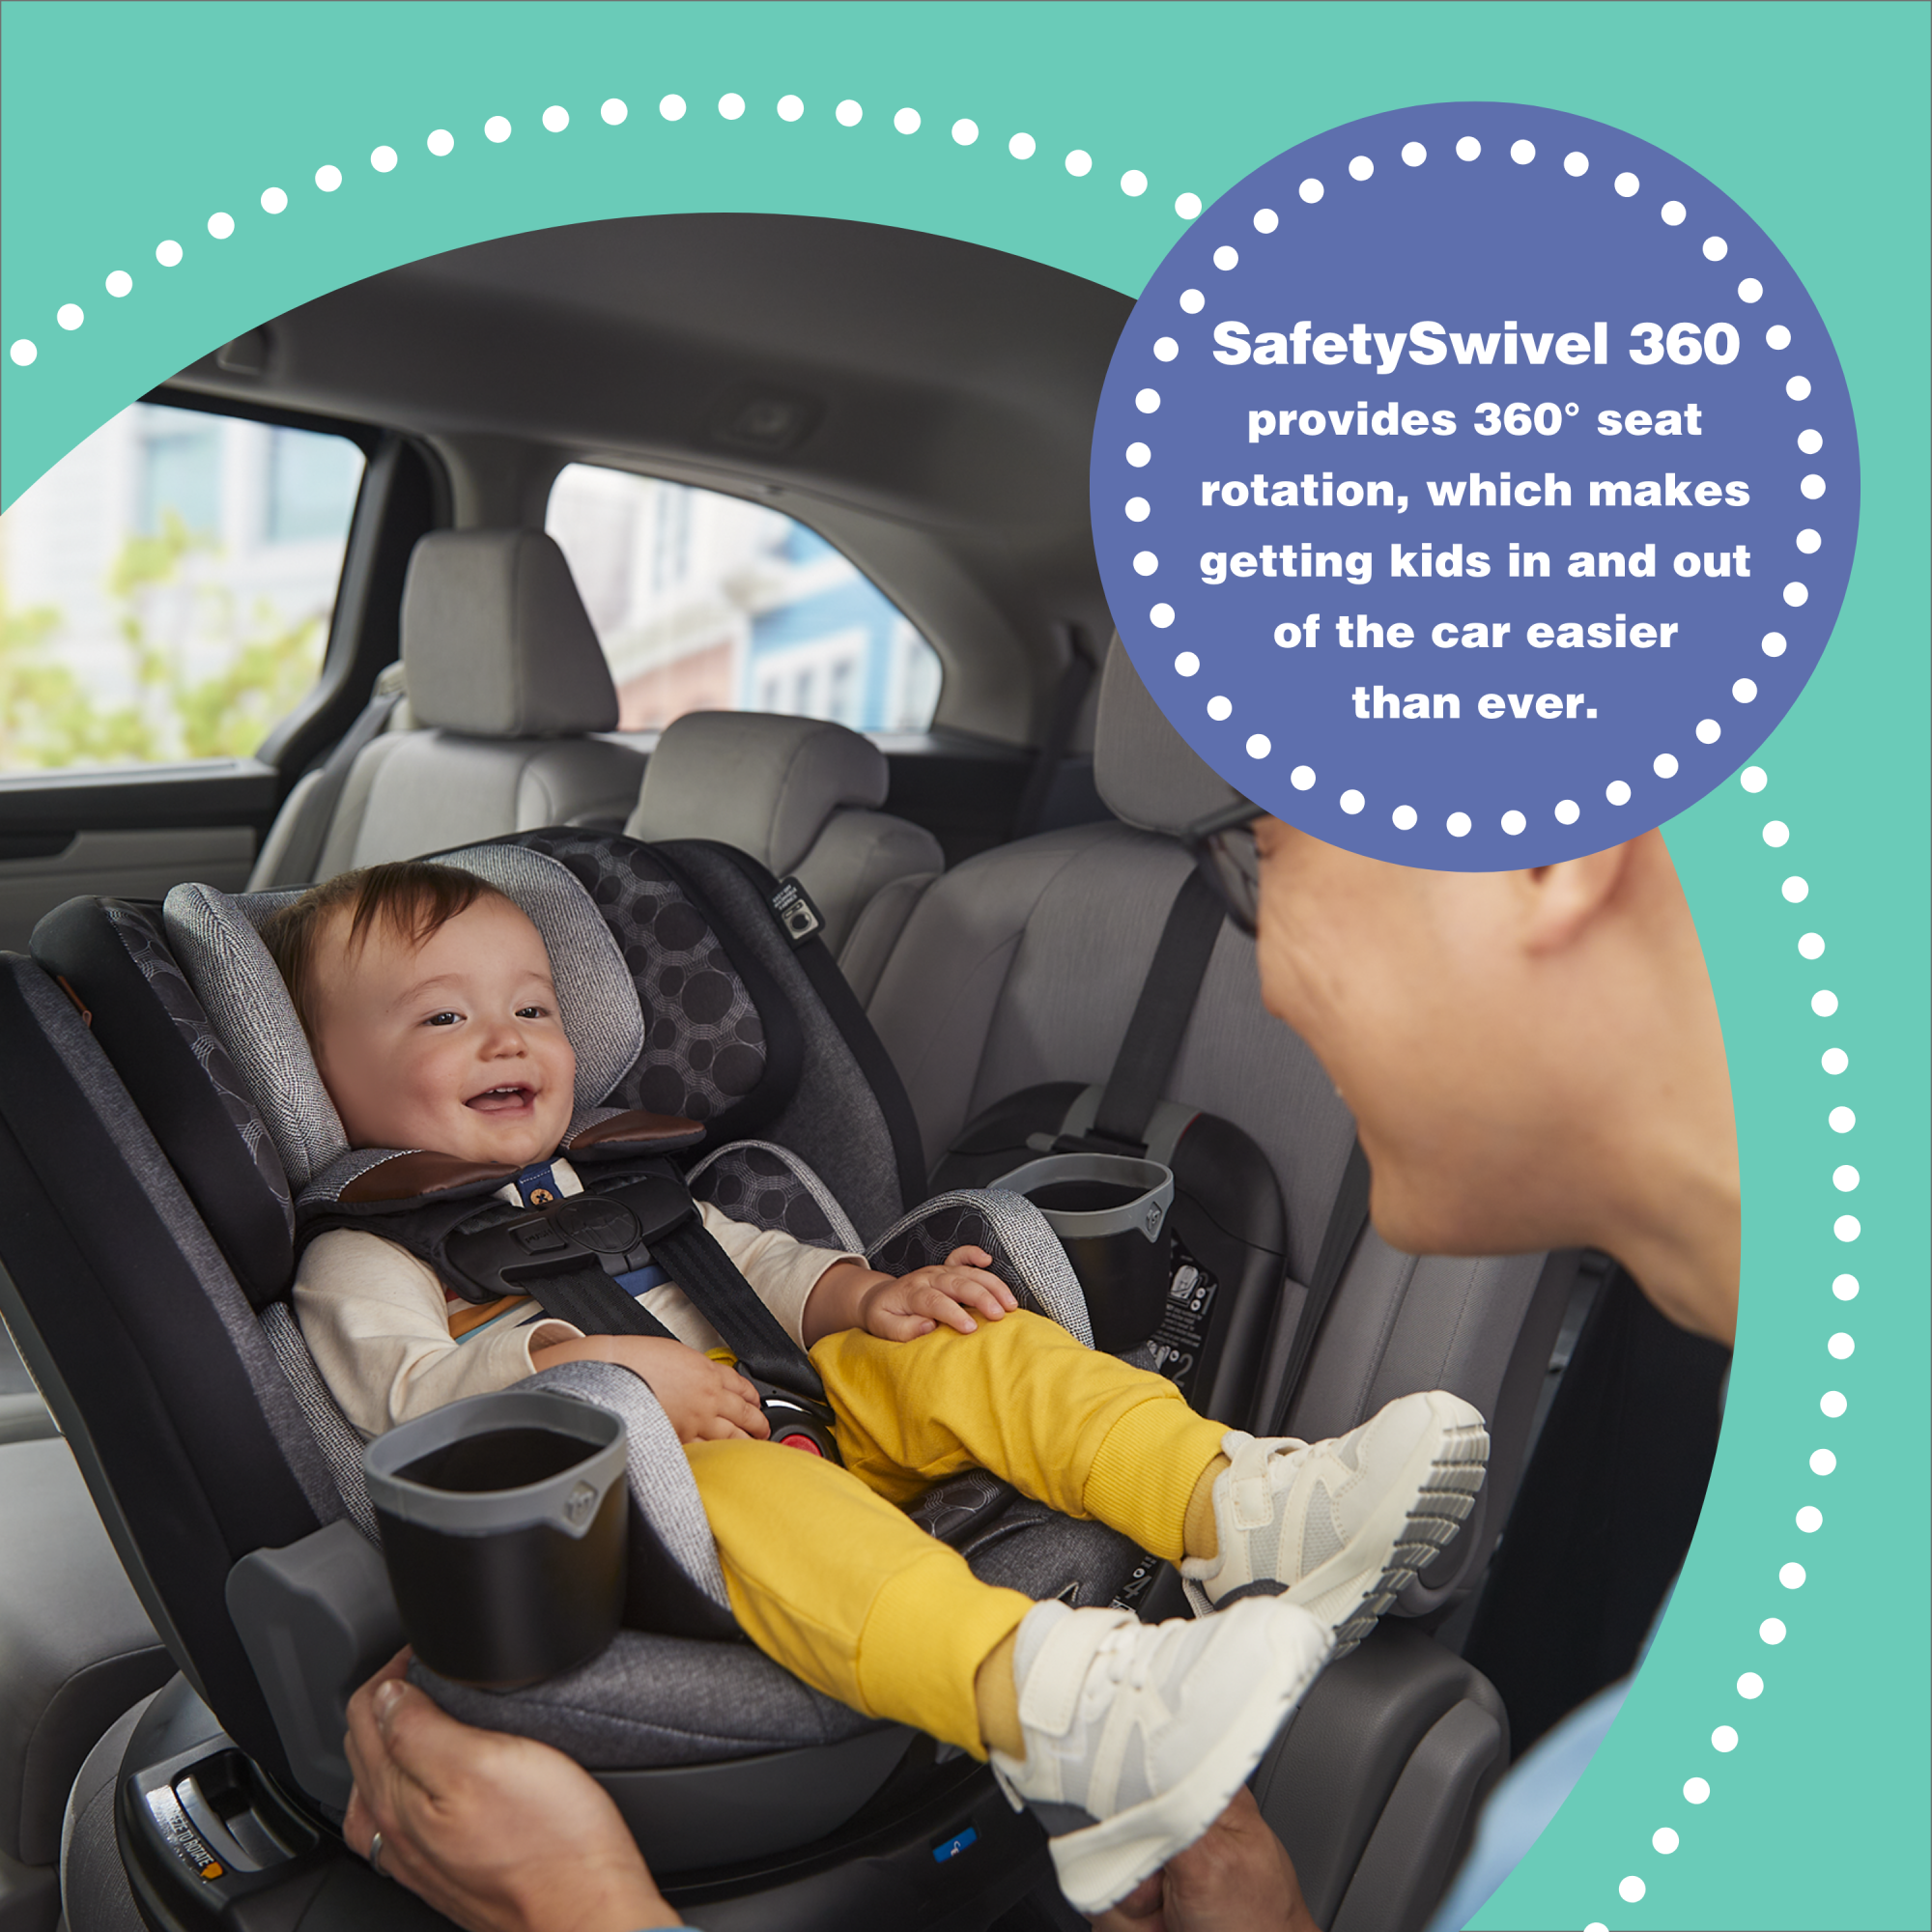 Disney Baby Turn and Go 360 Rotating All-in-One Convertible Car Seat - SafetySwivel 360 provides 360 degree seat rotation, which makes getting kids in and out of the car easier than ever